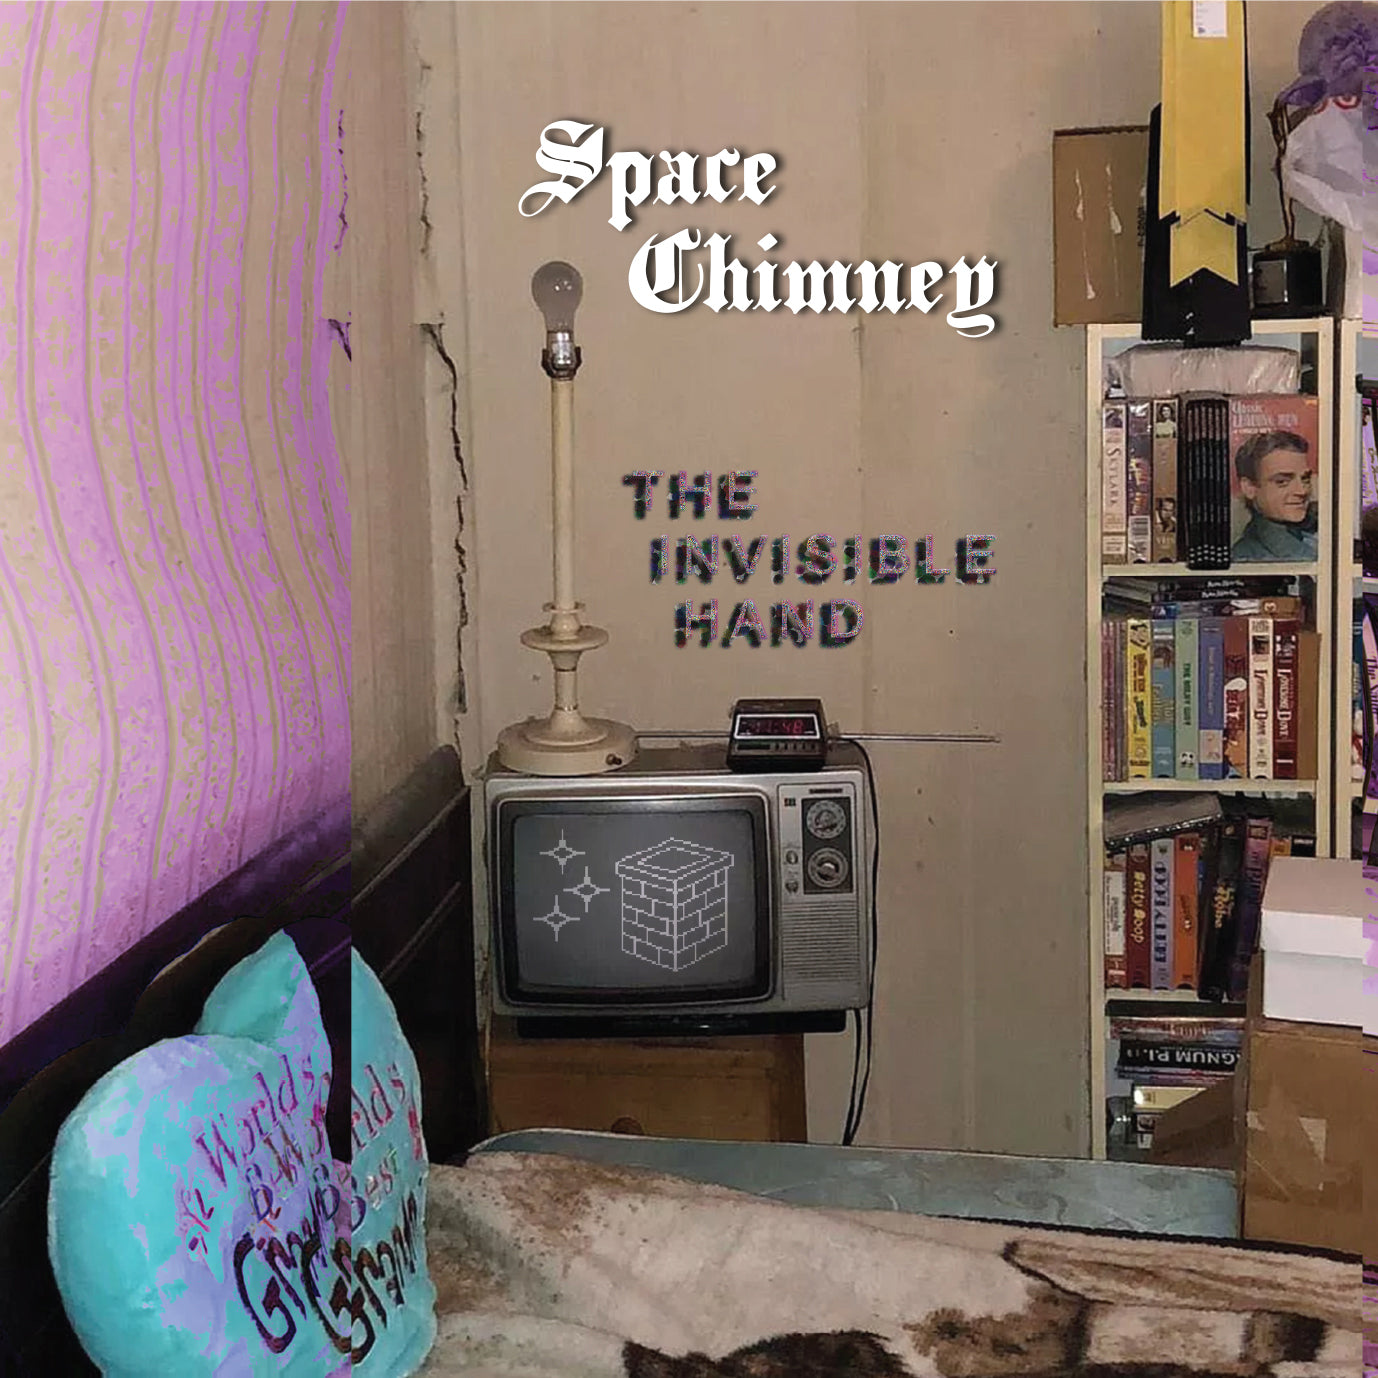 Space Chimney - The Invisible Hand (Digital)